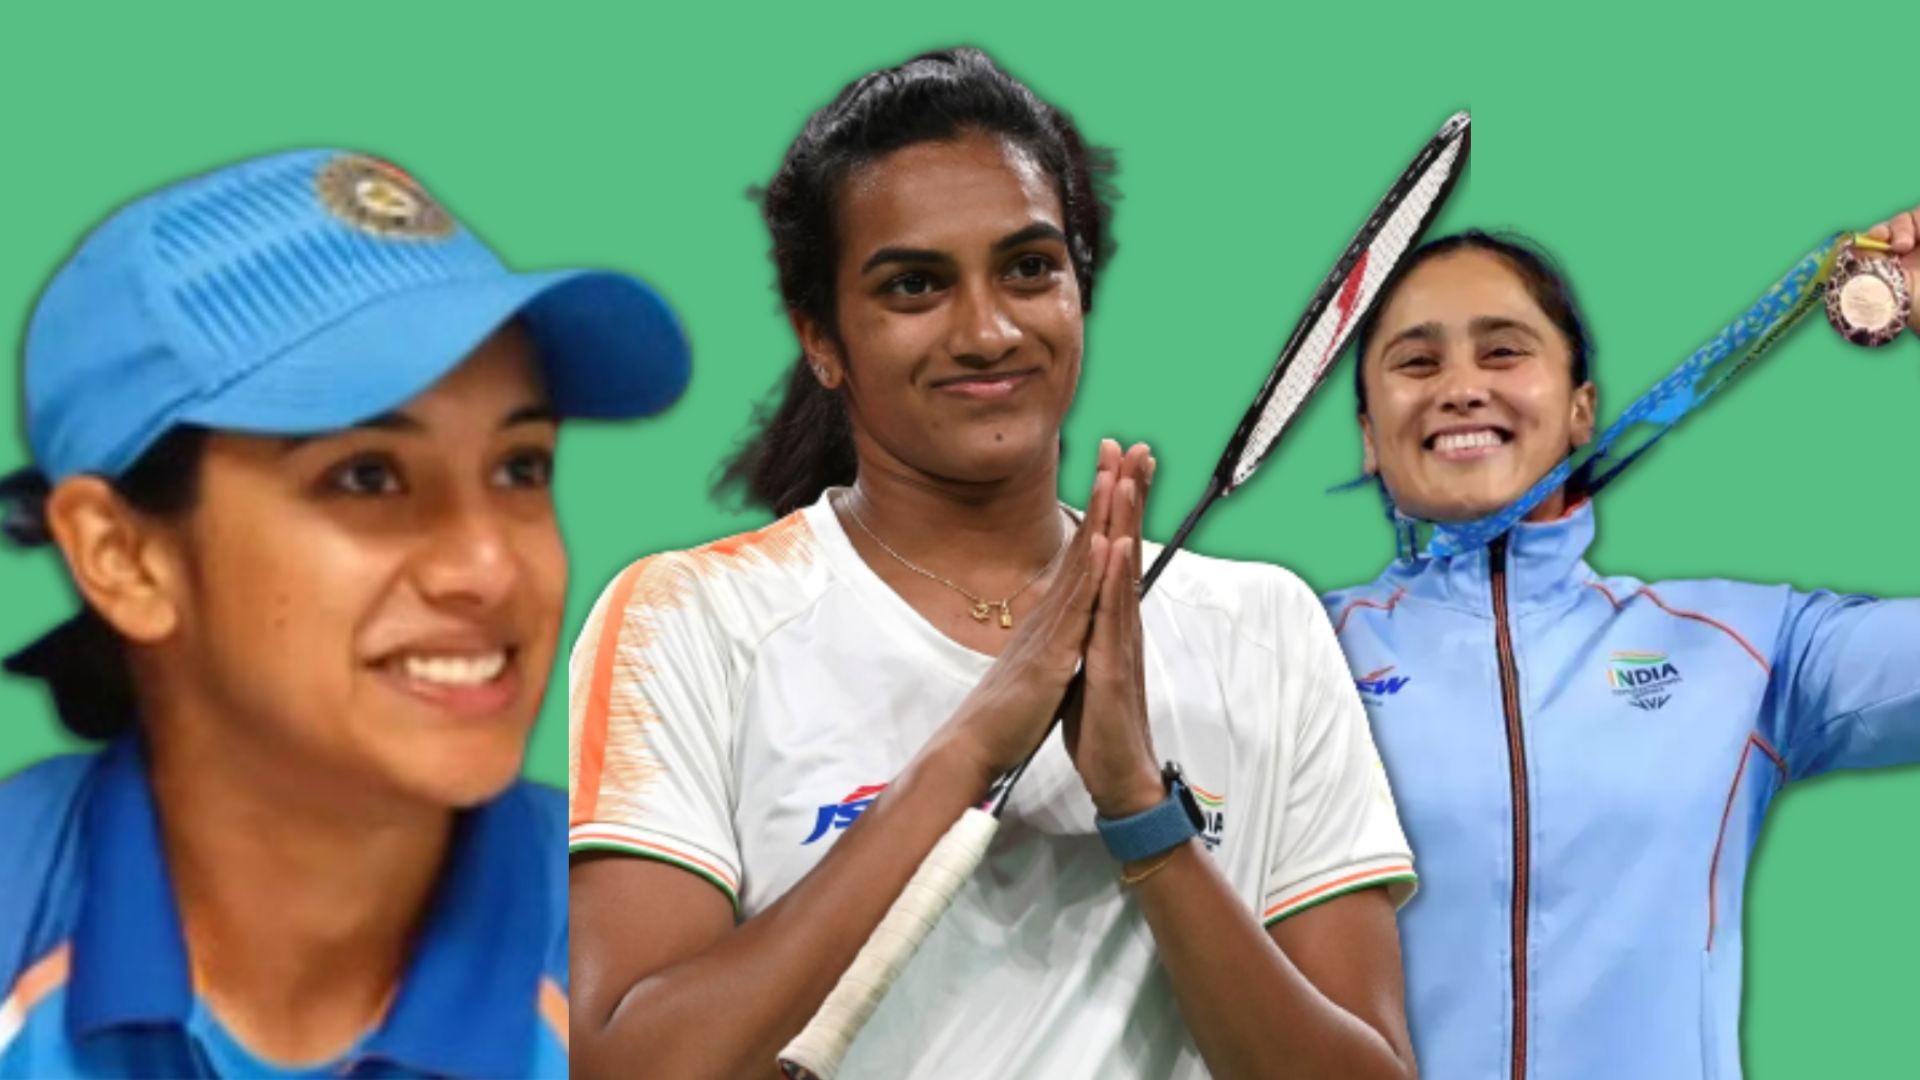 India Has Its Best Medal Tally At CWG 2022 With Women Athletes Etching Their Name In History!